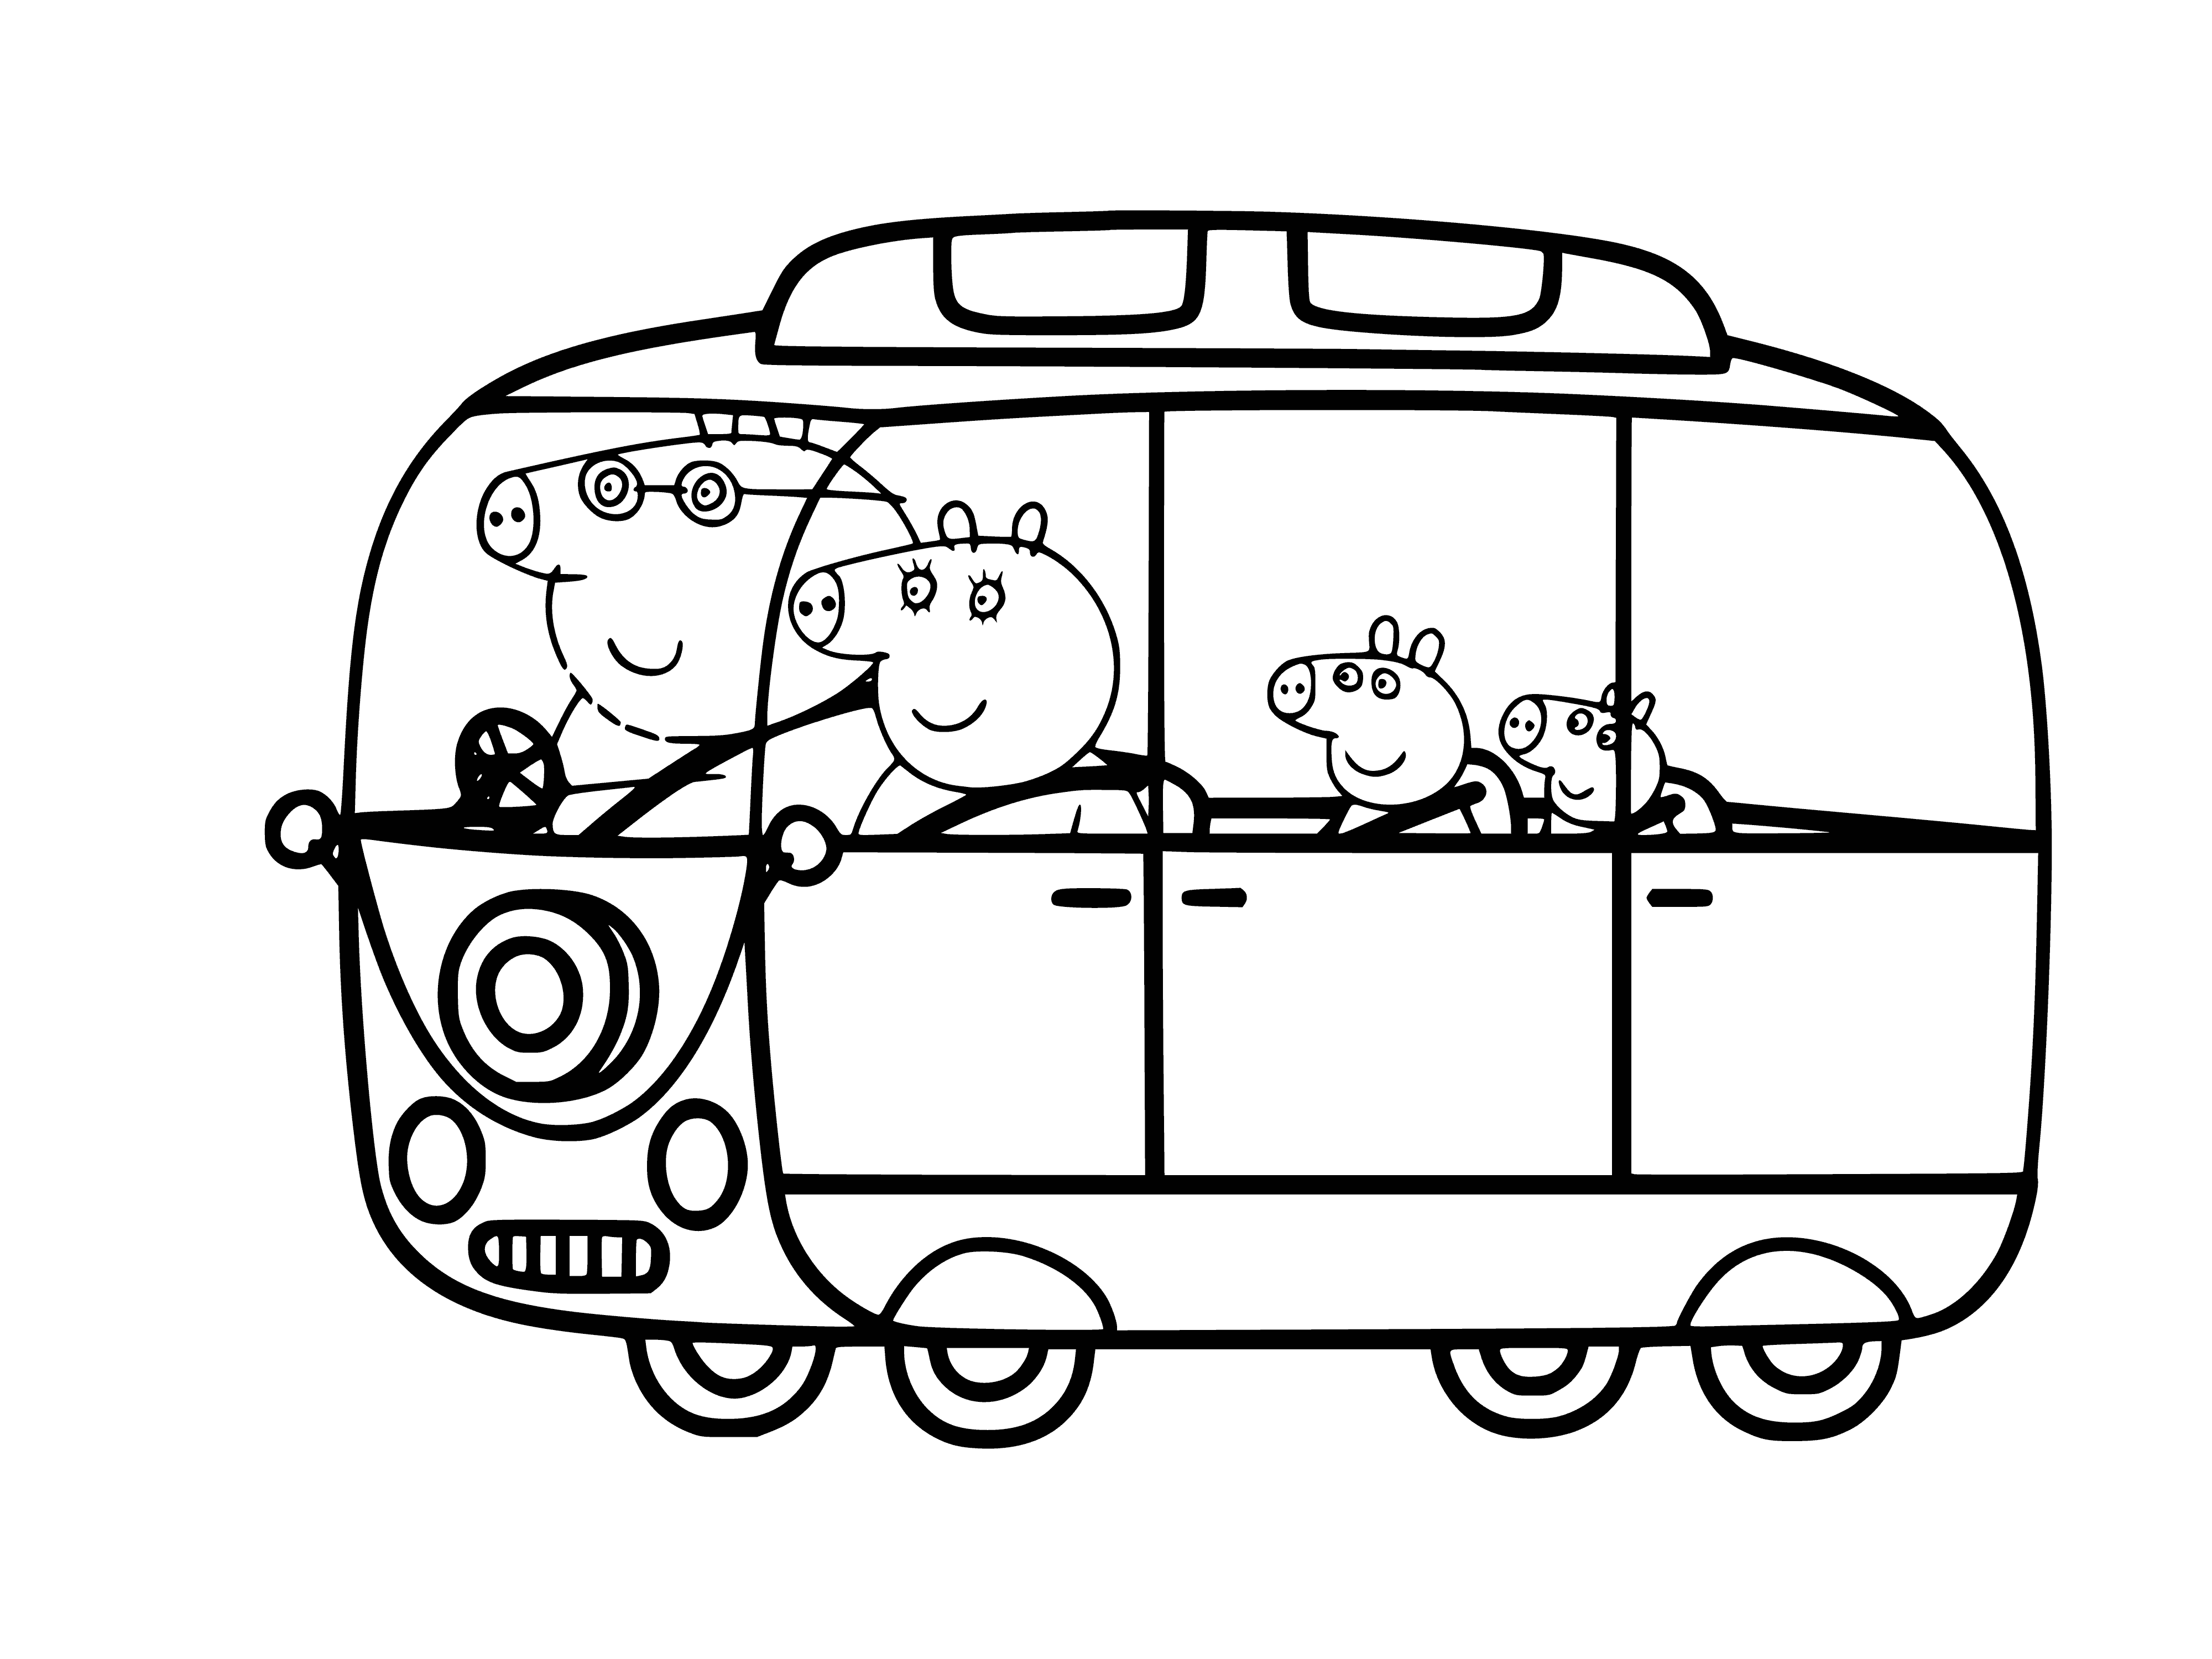 Family of pigs in the car coloring page